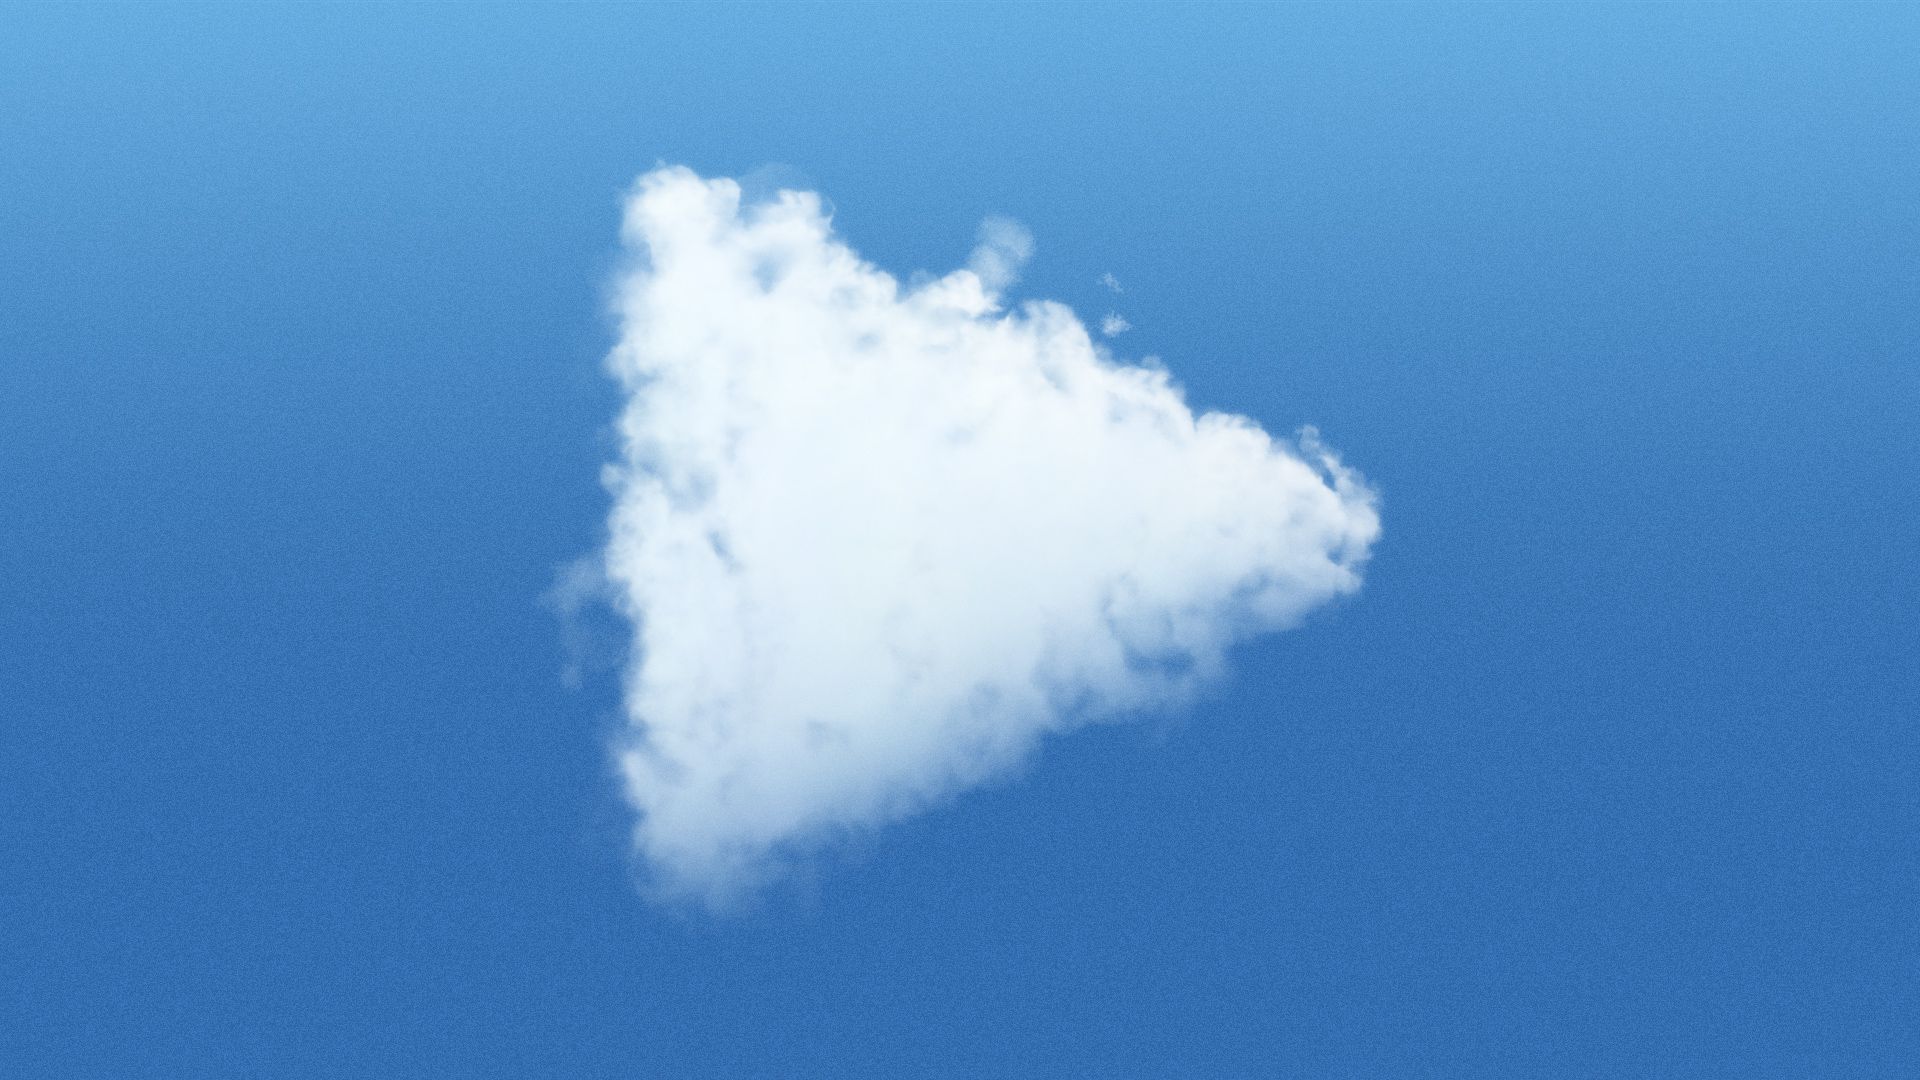 Illustration of a cloud in the shape of a play icon.